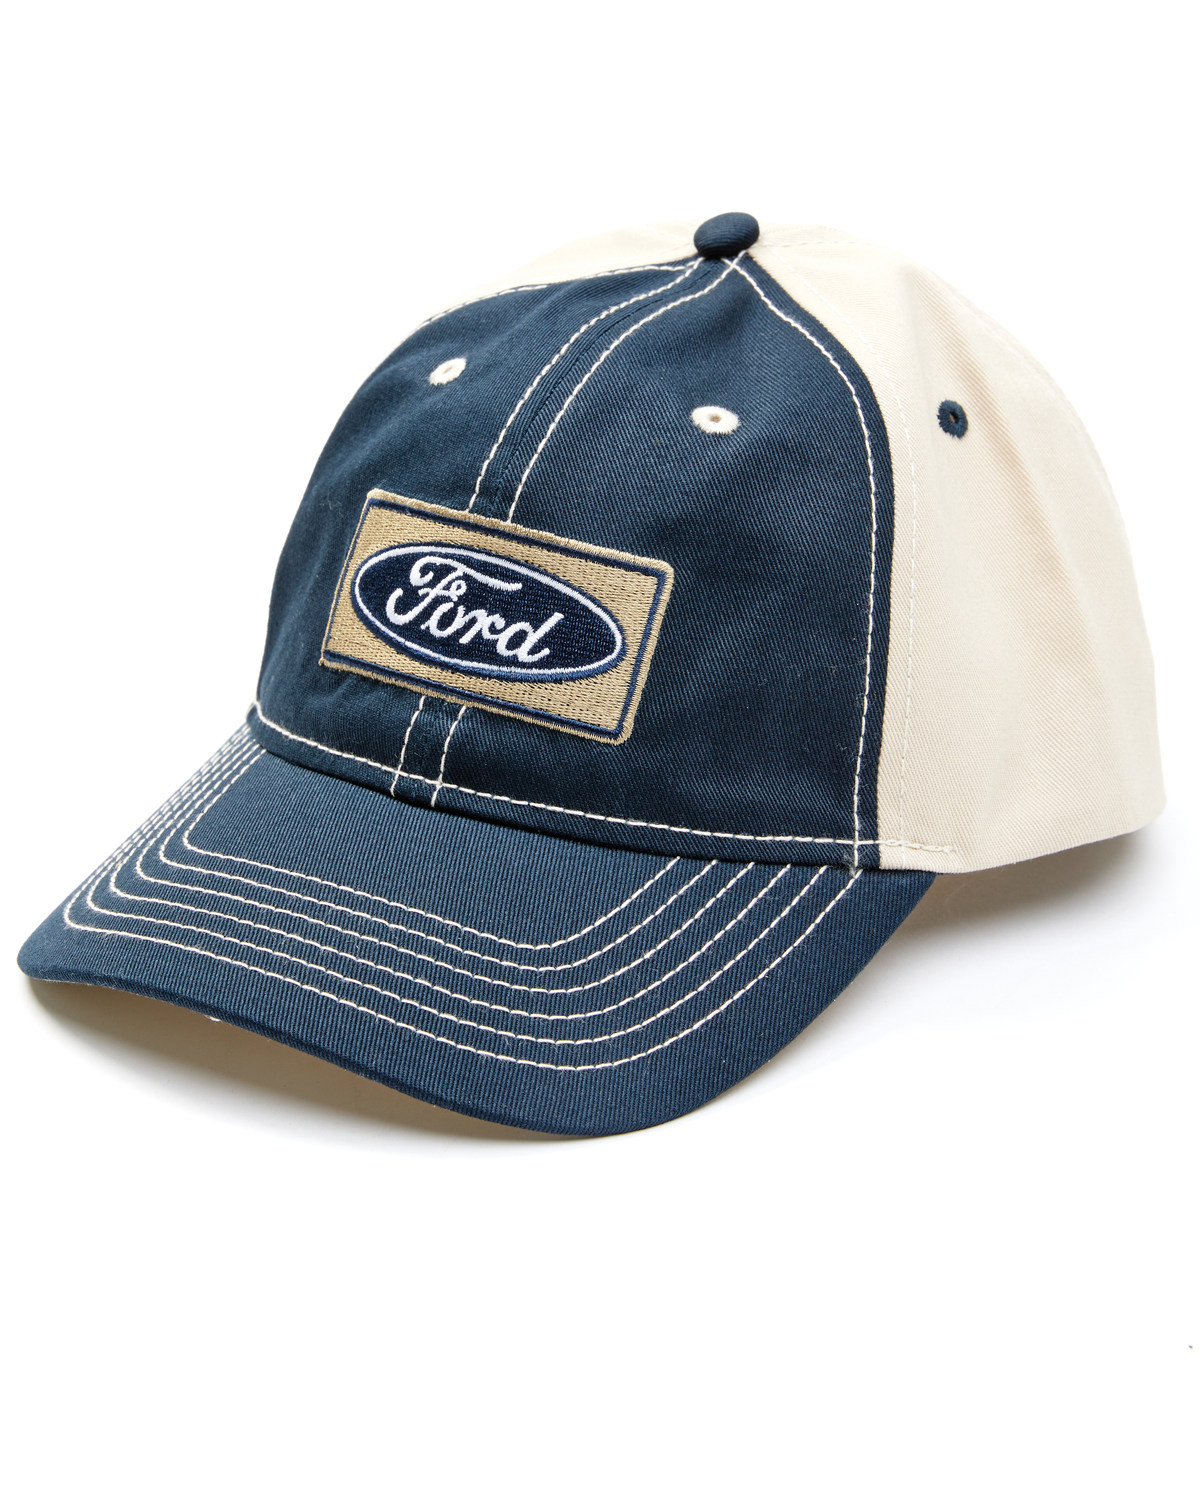 H3 Sportgear Men's Ford Logo Embroidered Patch Ball Cap